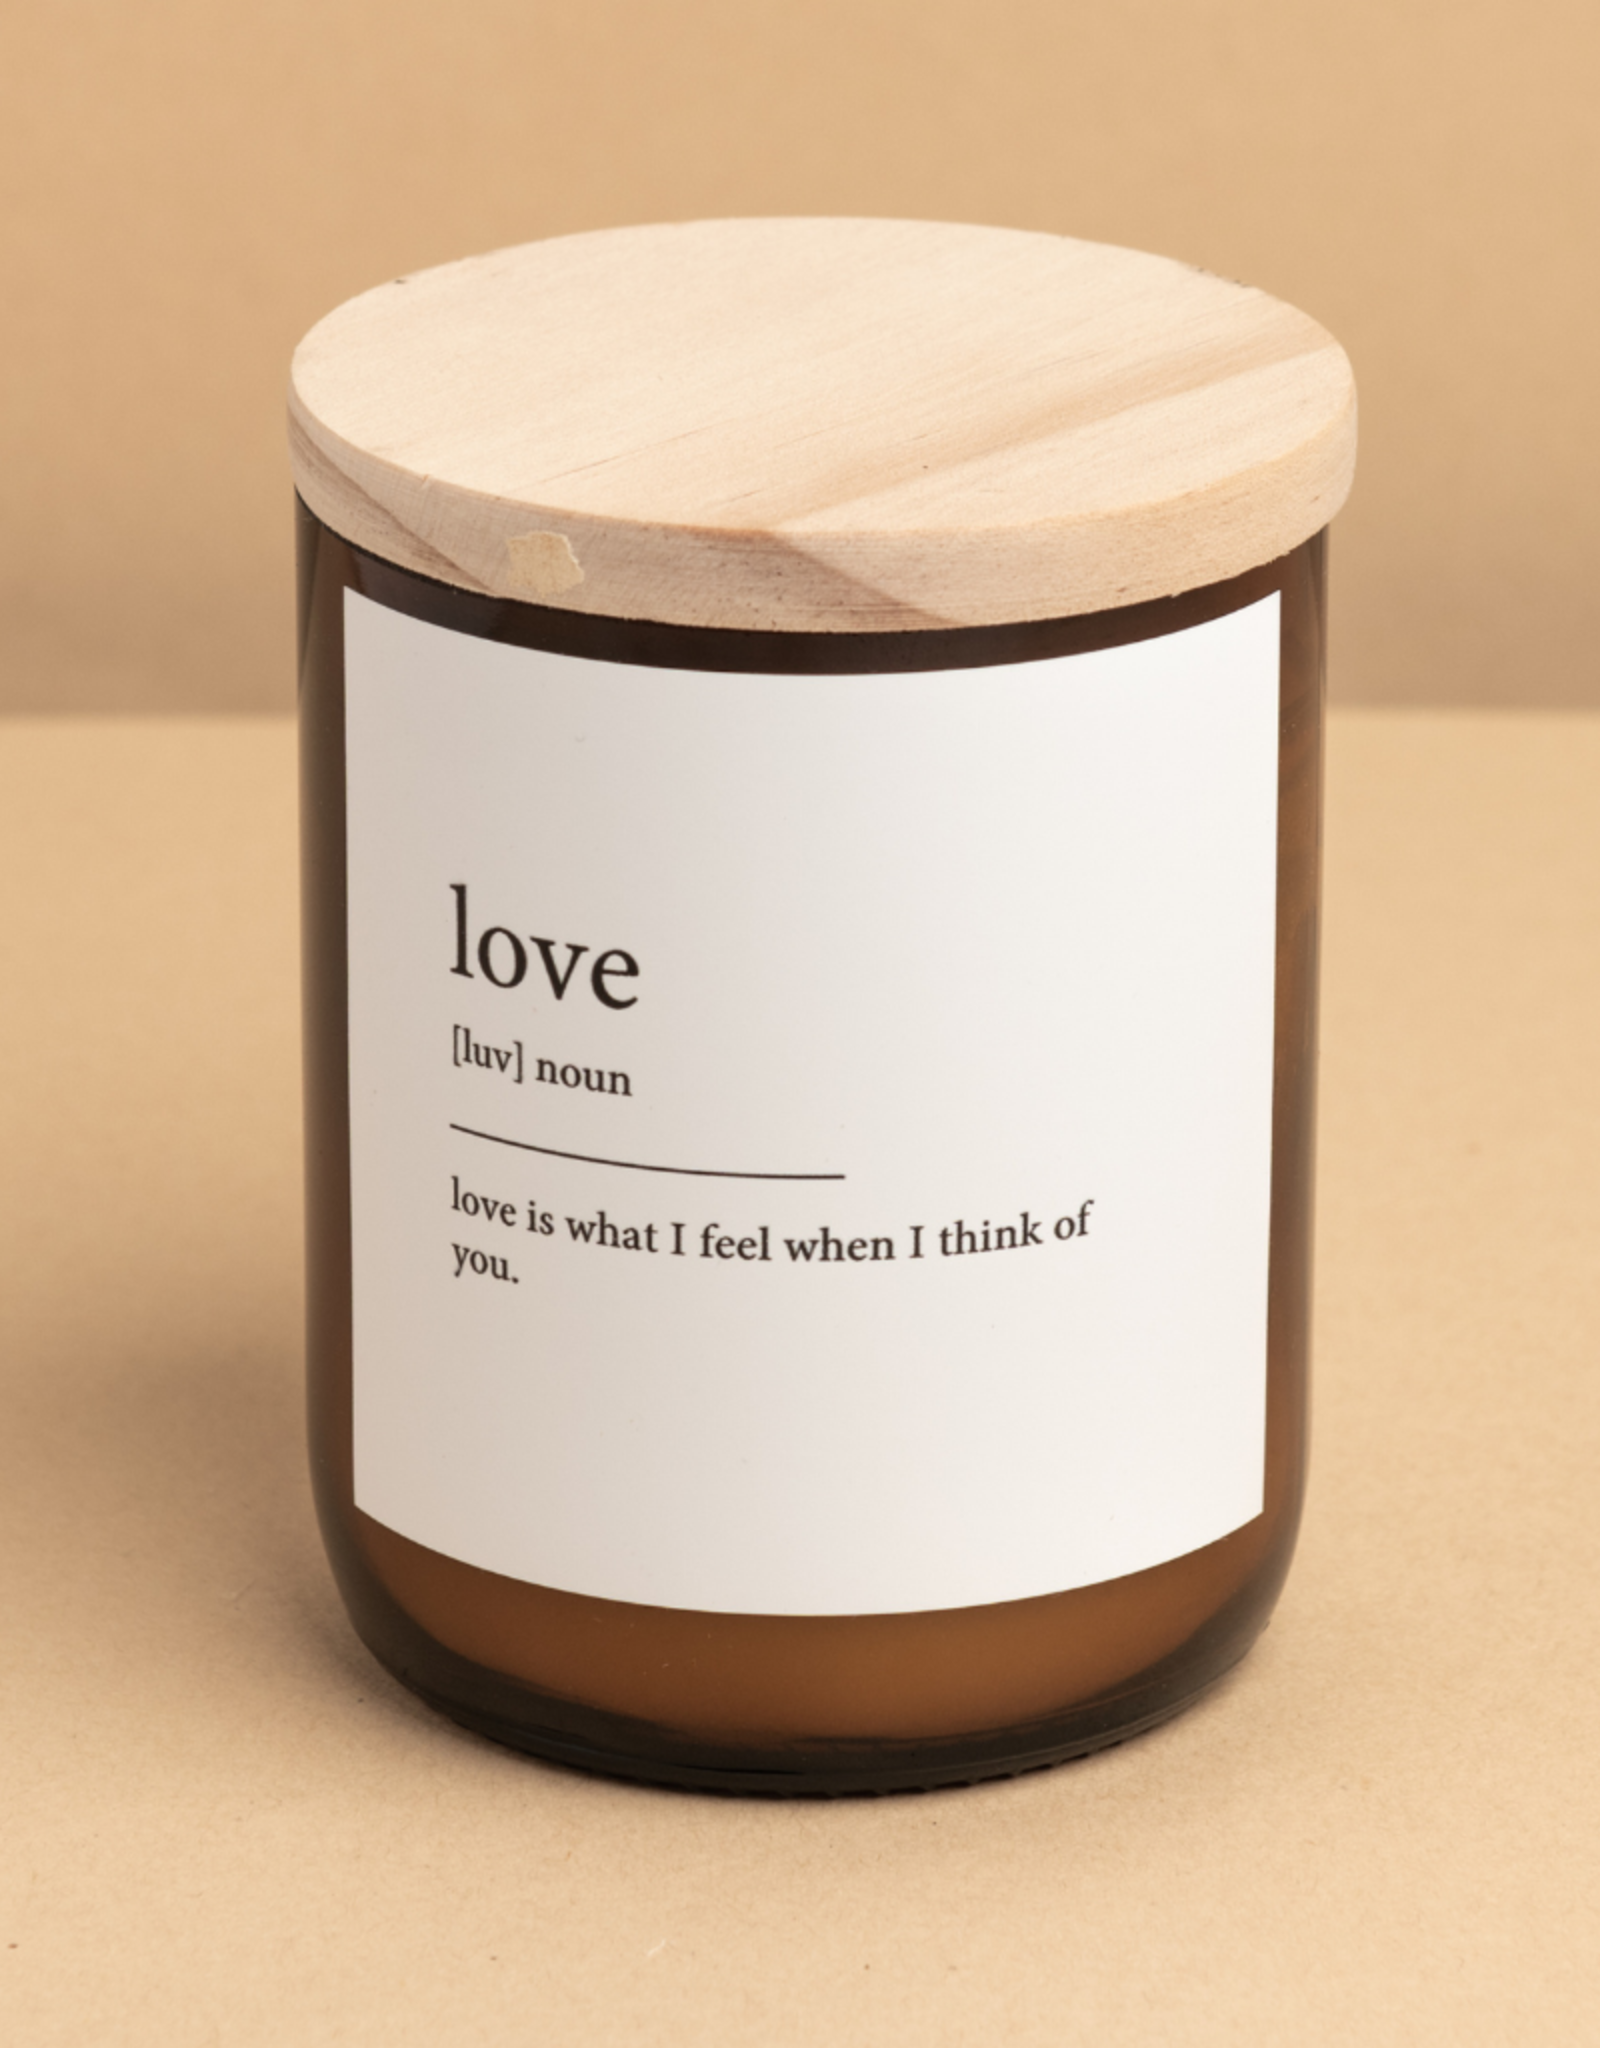 The Commomfolk Commonfolk Dictionary Candle/Love